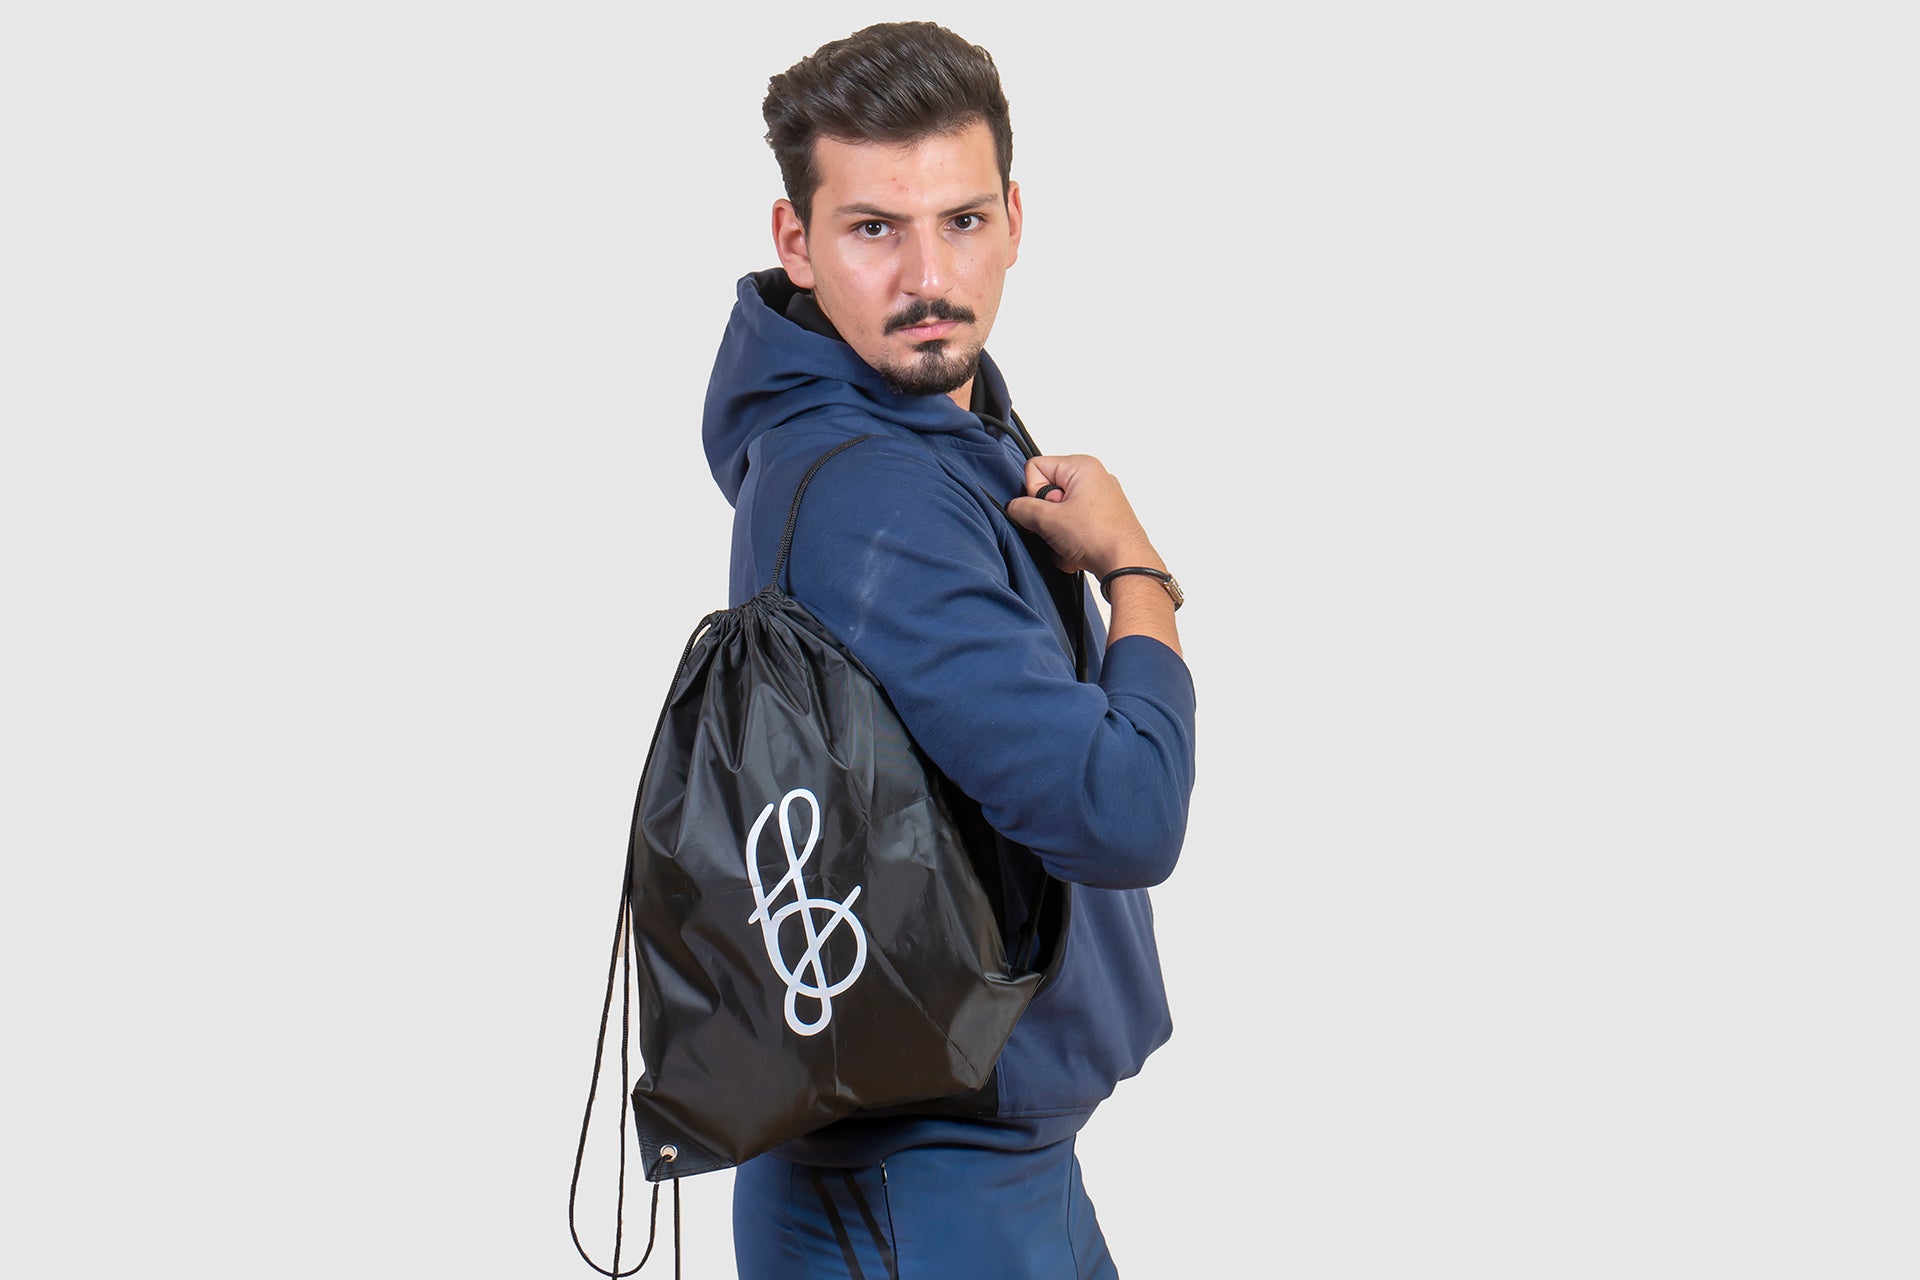 This Drawstring sport bag is the best gym sack in the industry. It is very stylish and fashionable. 